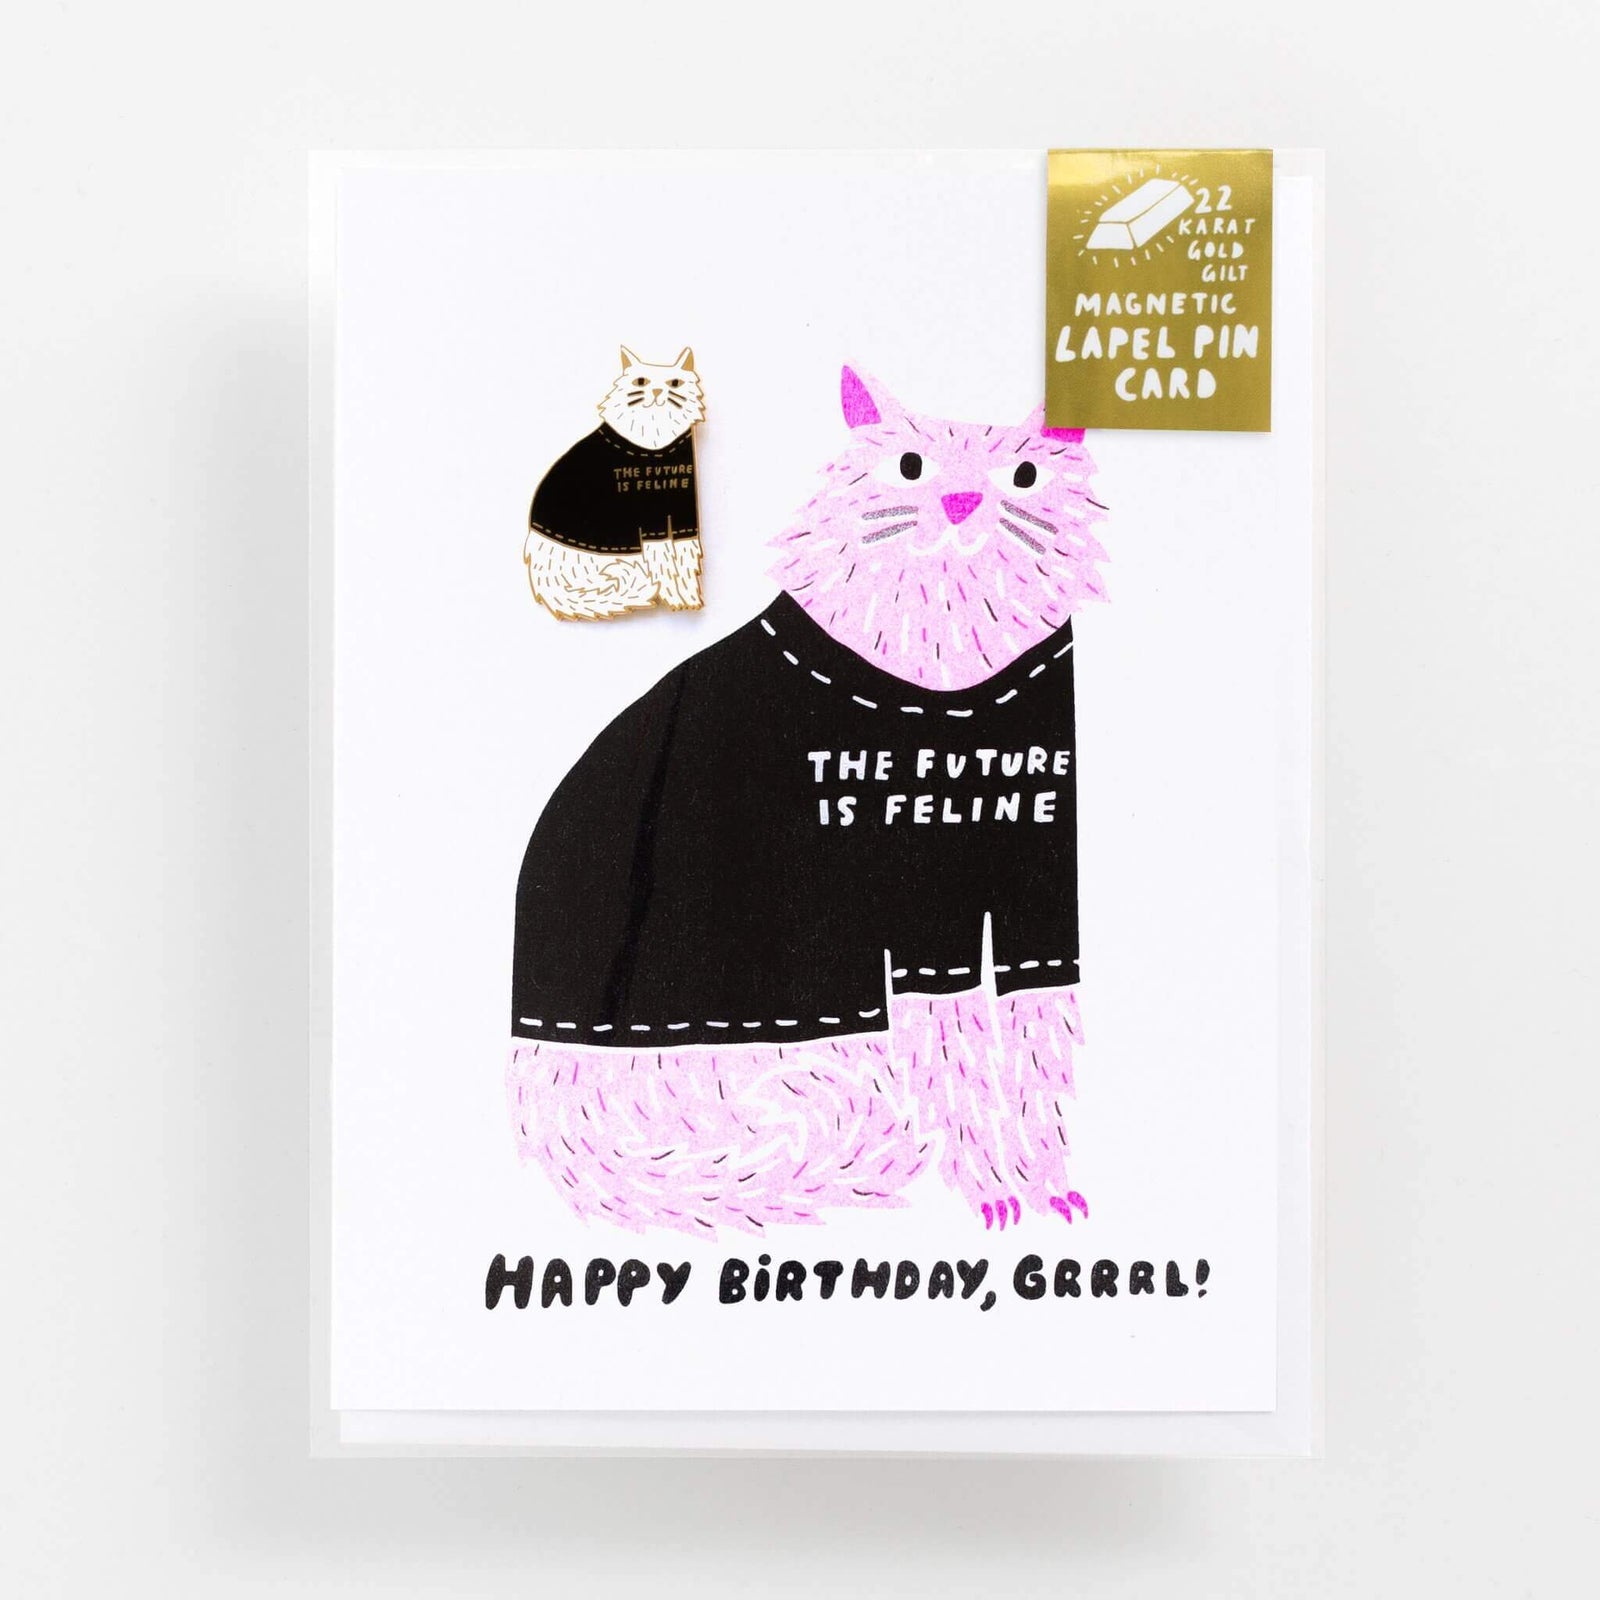 Pin on Greeting Cards and Party Supplies